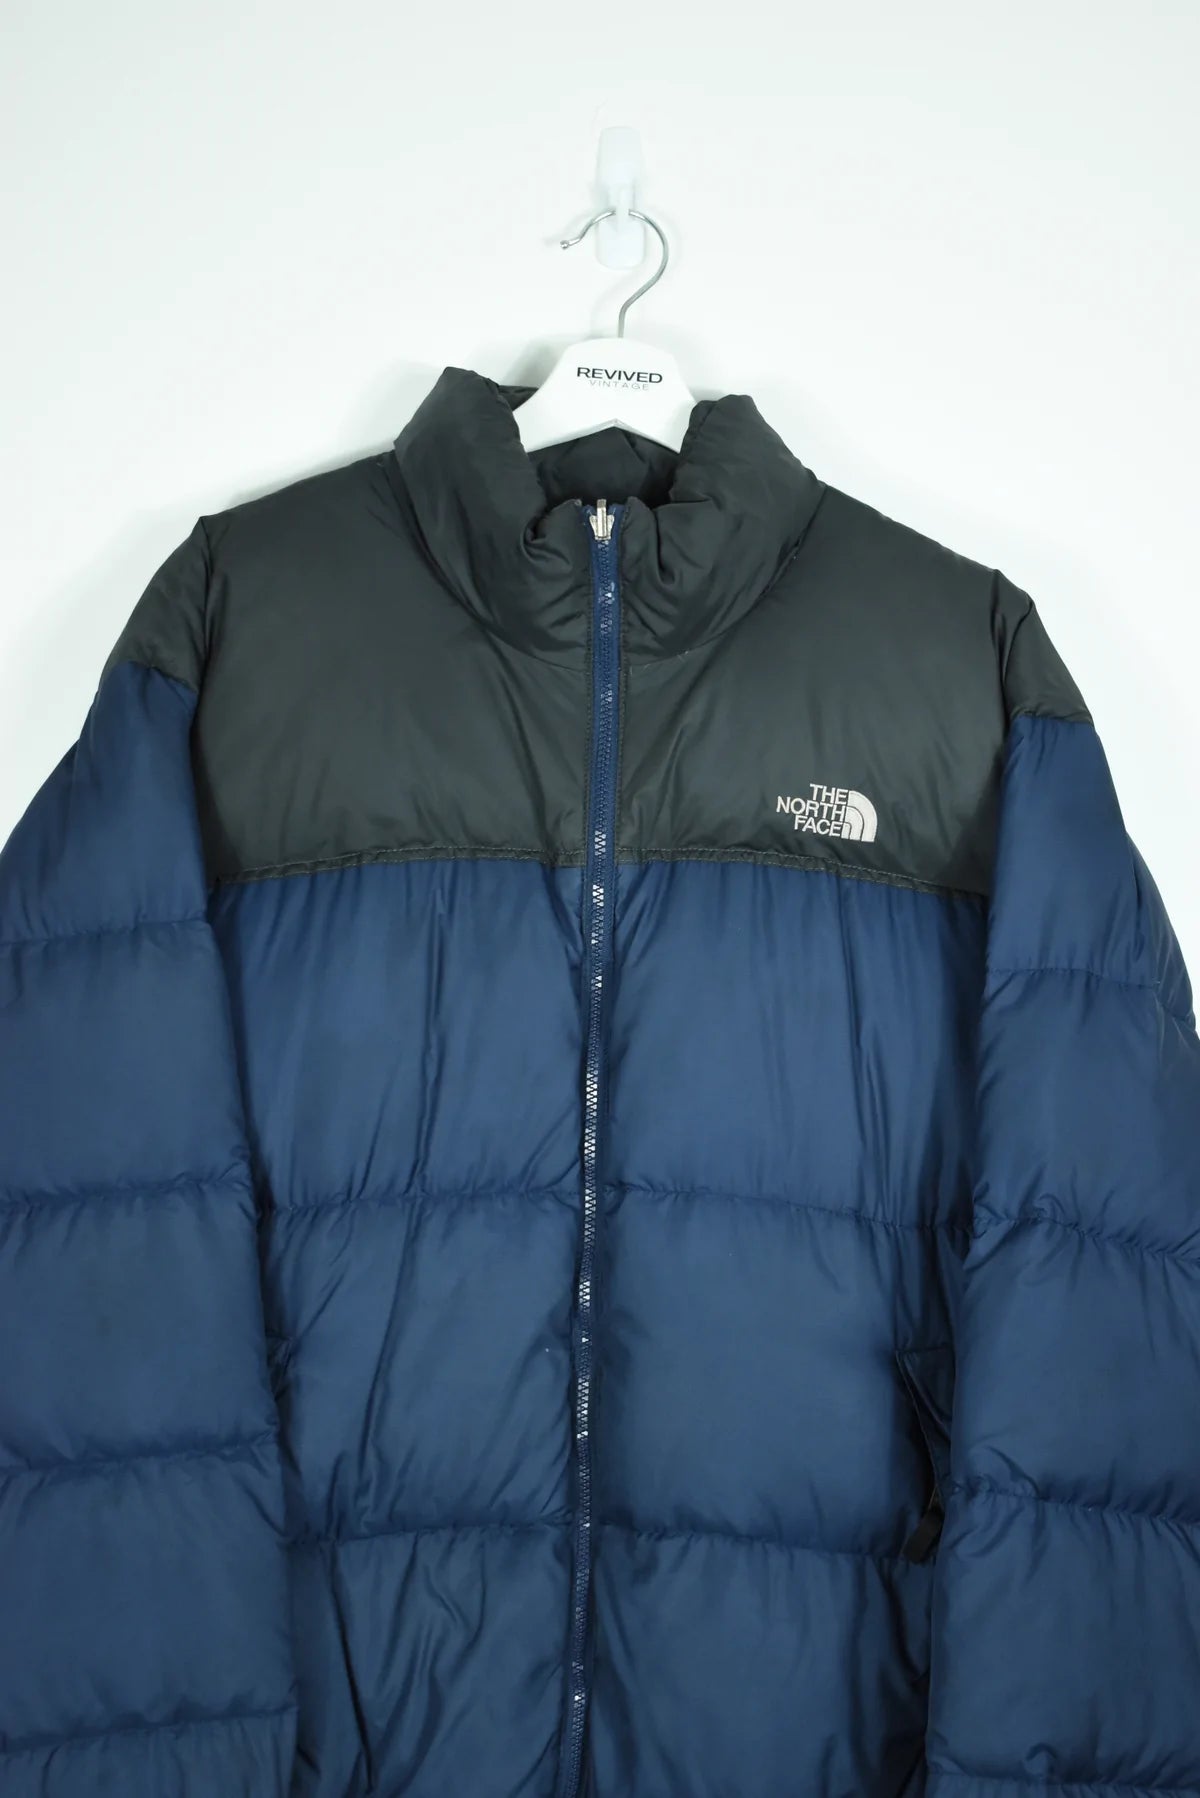 VINTAGE NORTH FACE NUPTSE 700 PUFFER NAVY LARGE